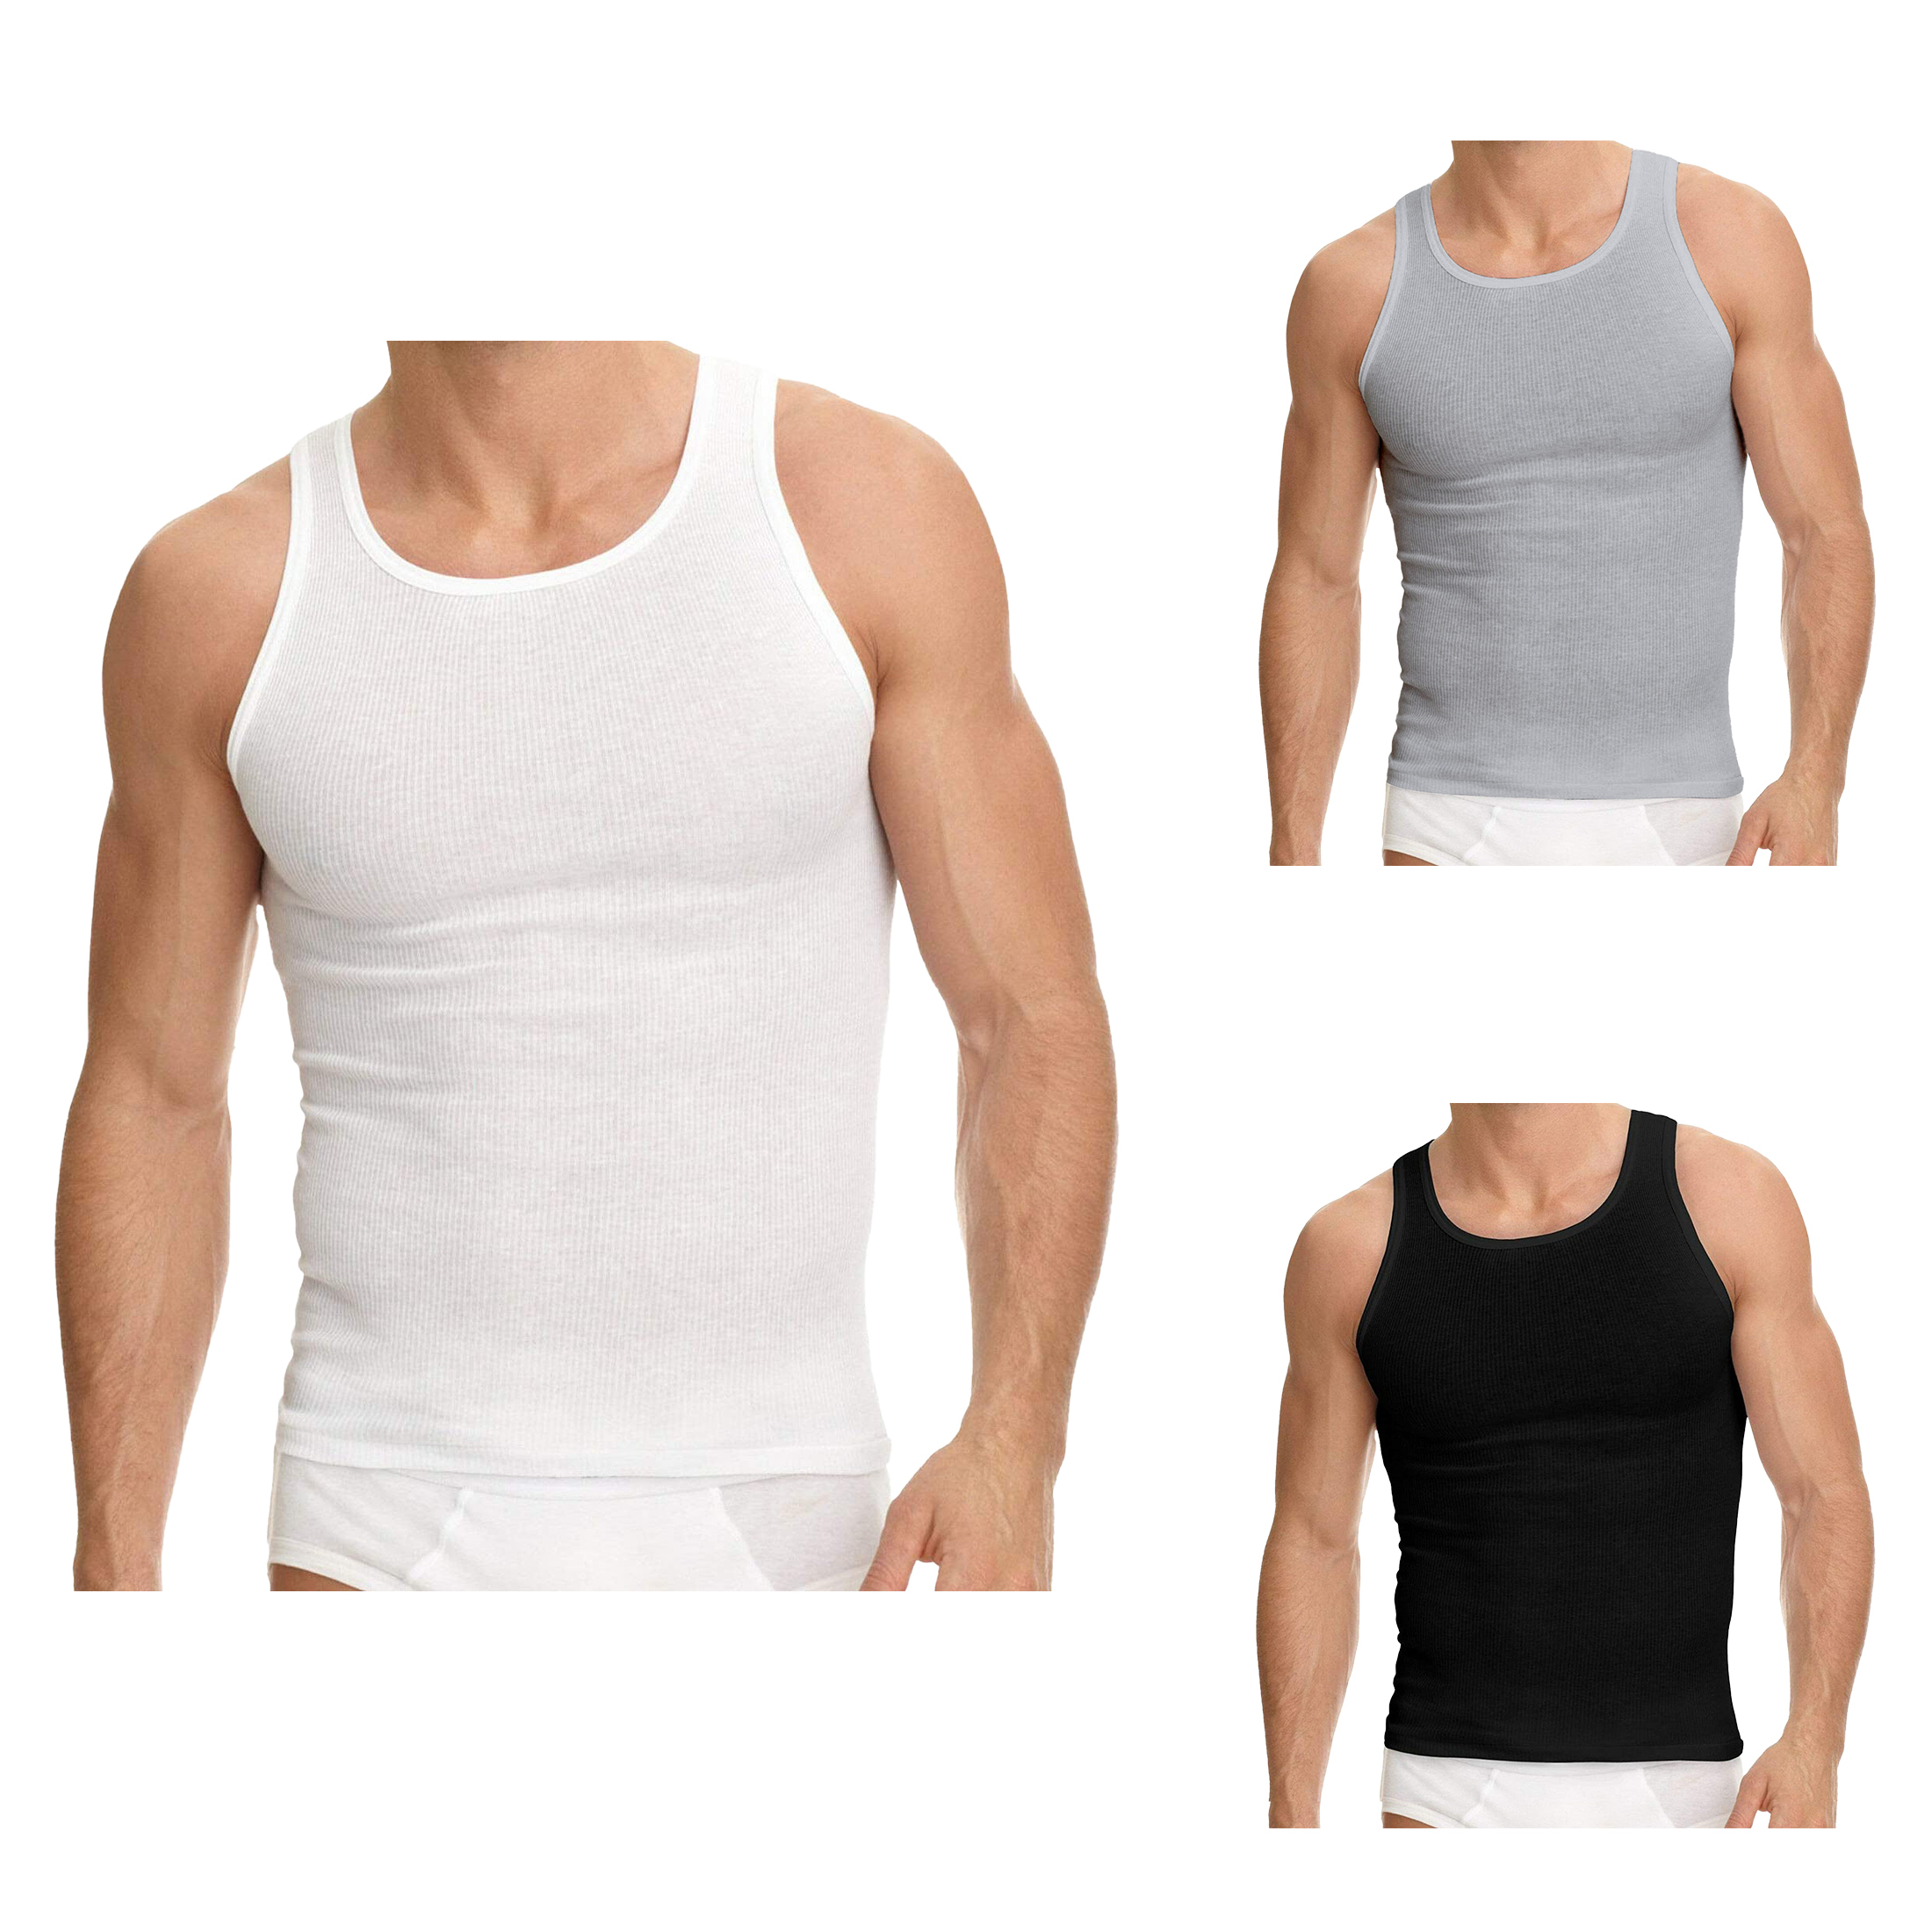 12-Pack: Men's Solid Cotton Soft Ribbed Slim-Fitting Summer Tank Tops - Assorted, Large